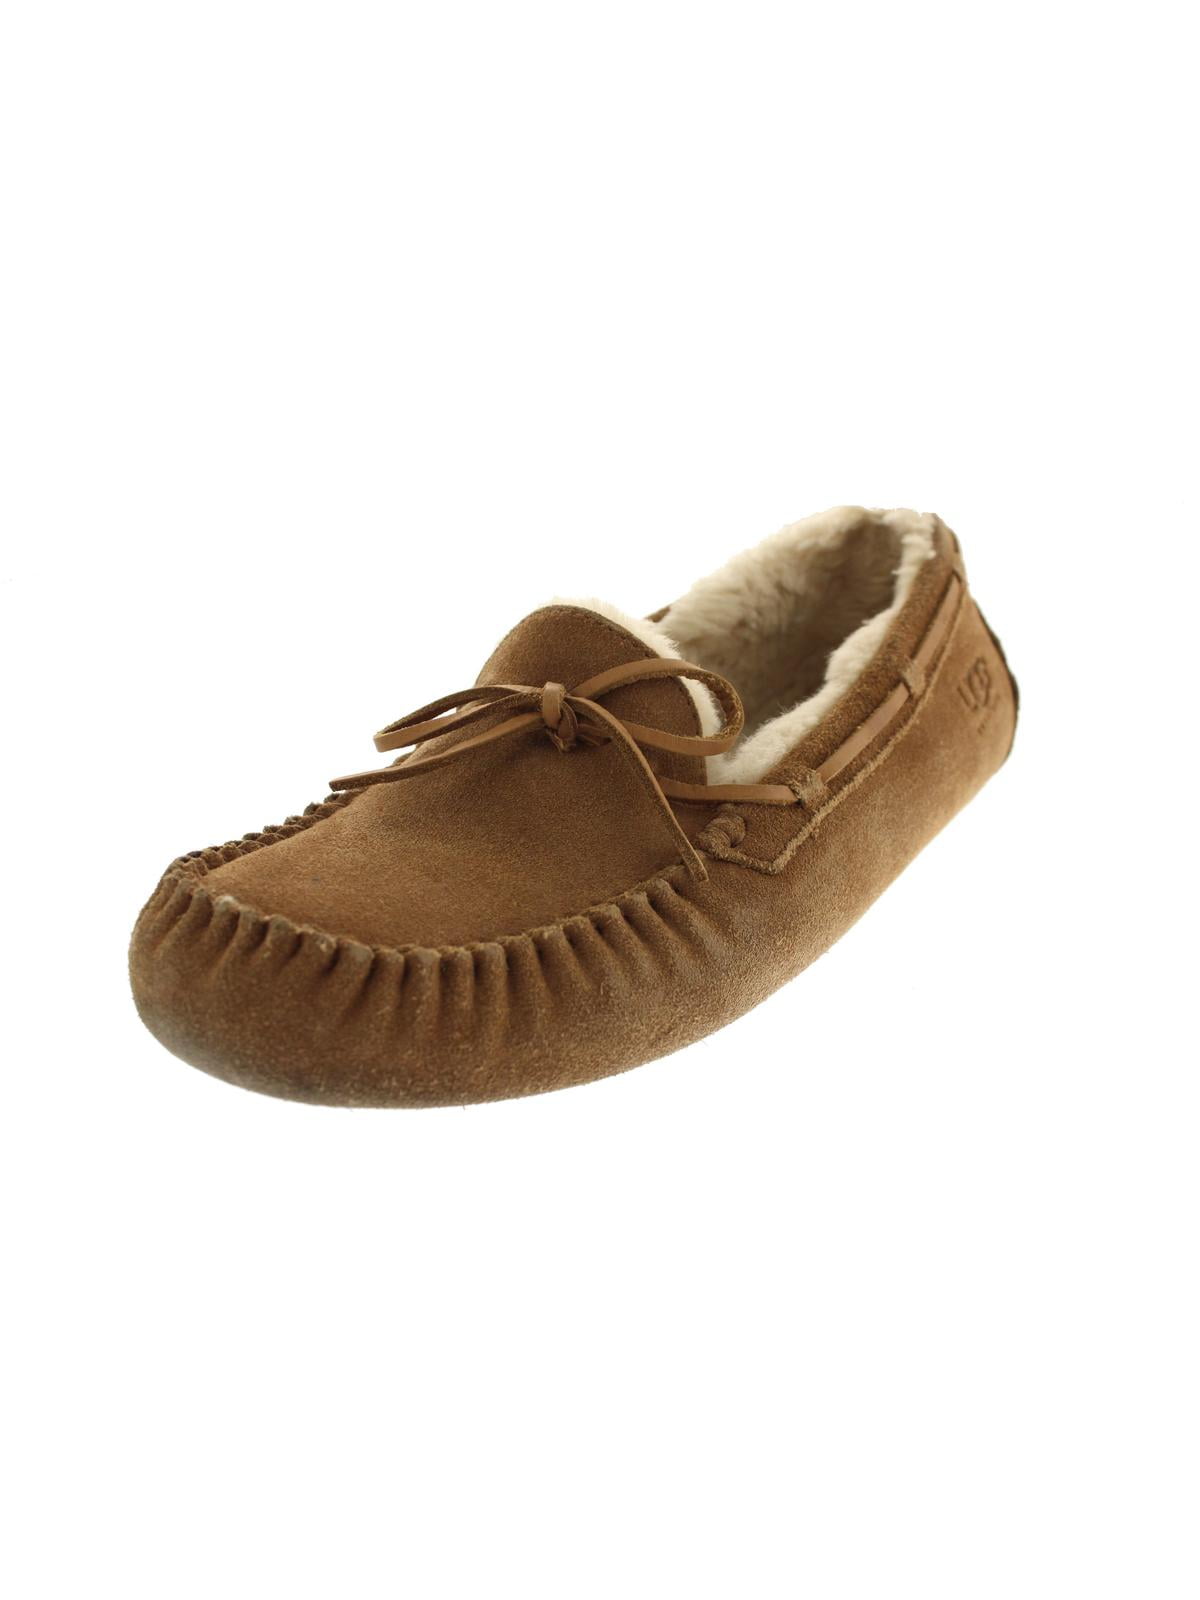 Moccasins Mens Suede Real Wool Lined Moccs Slippers Brown